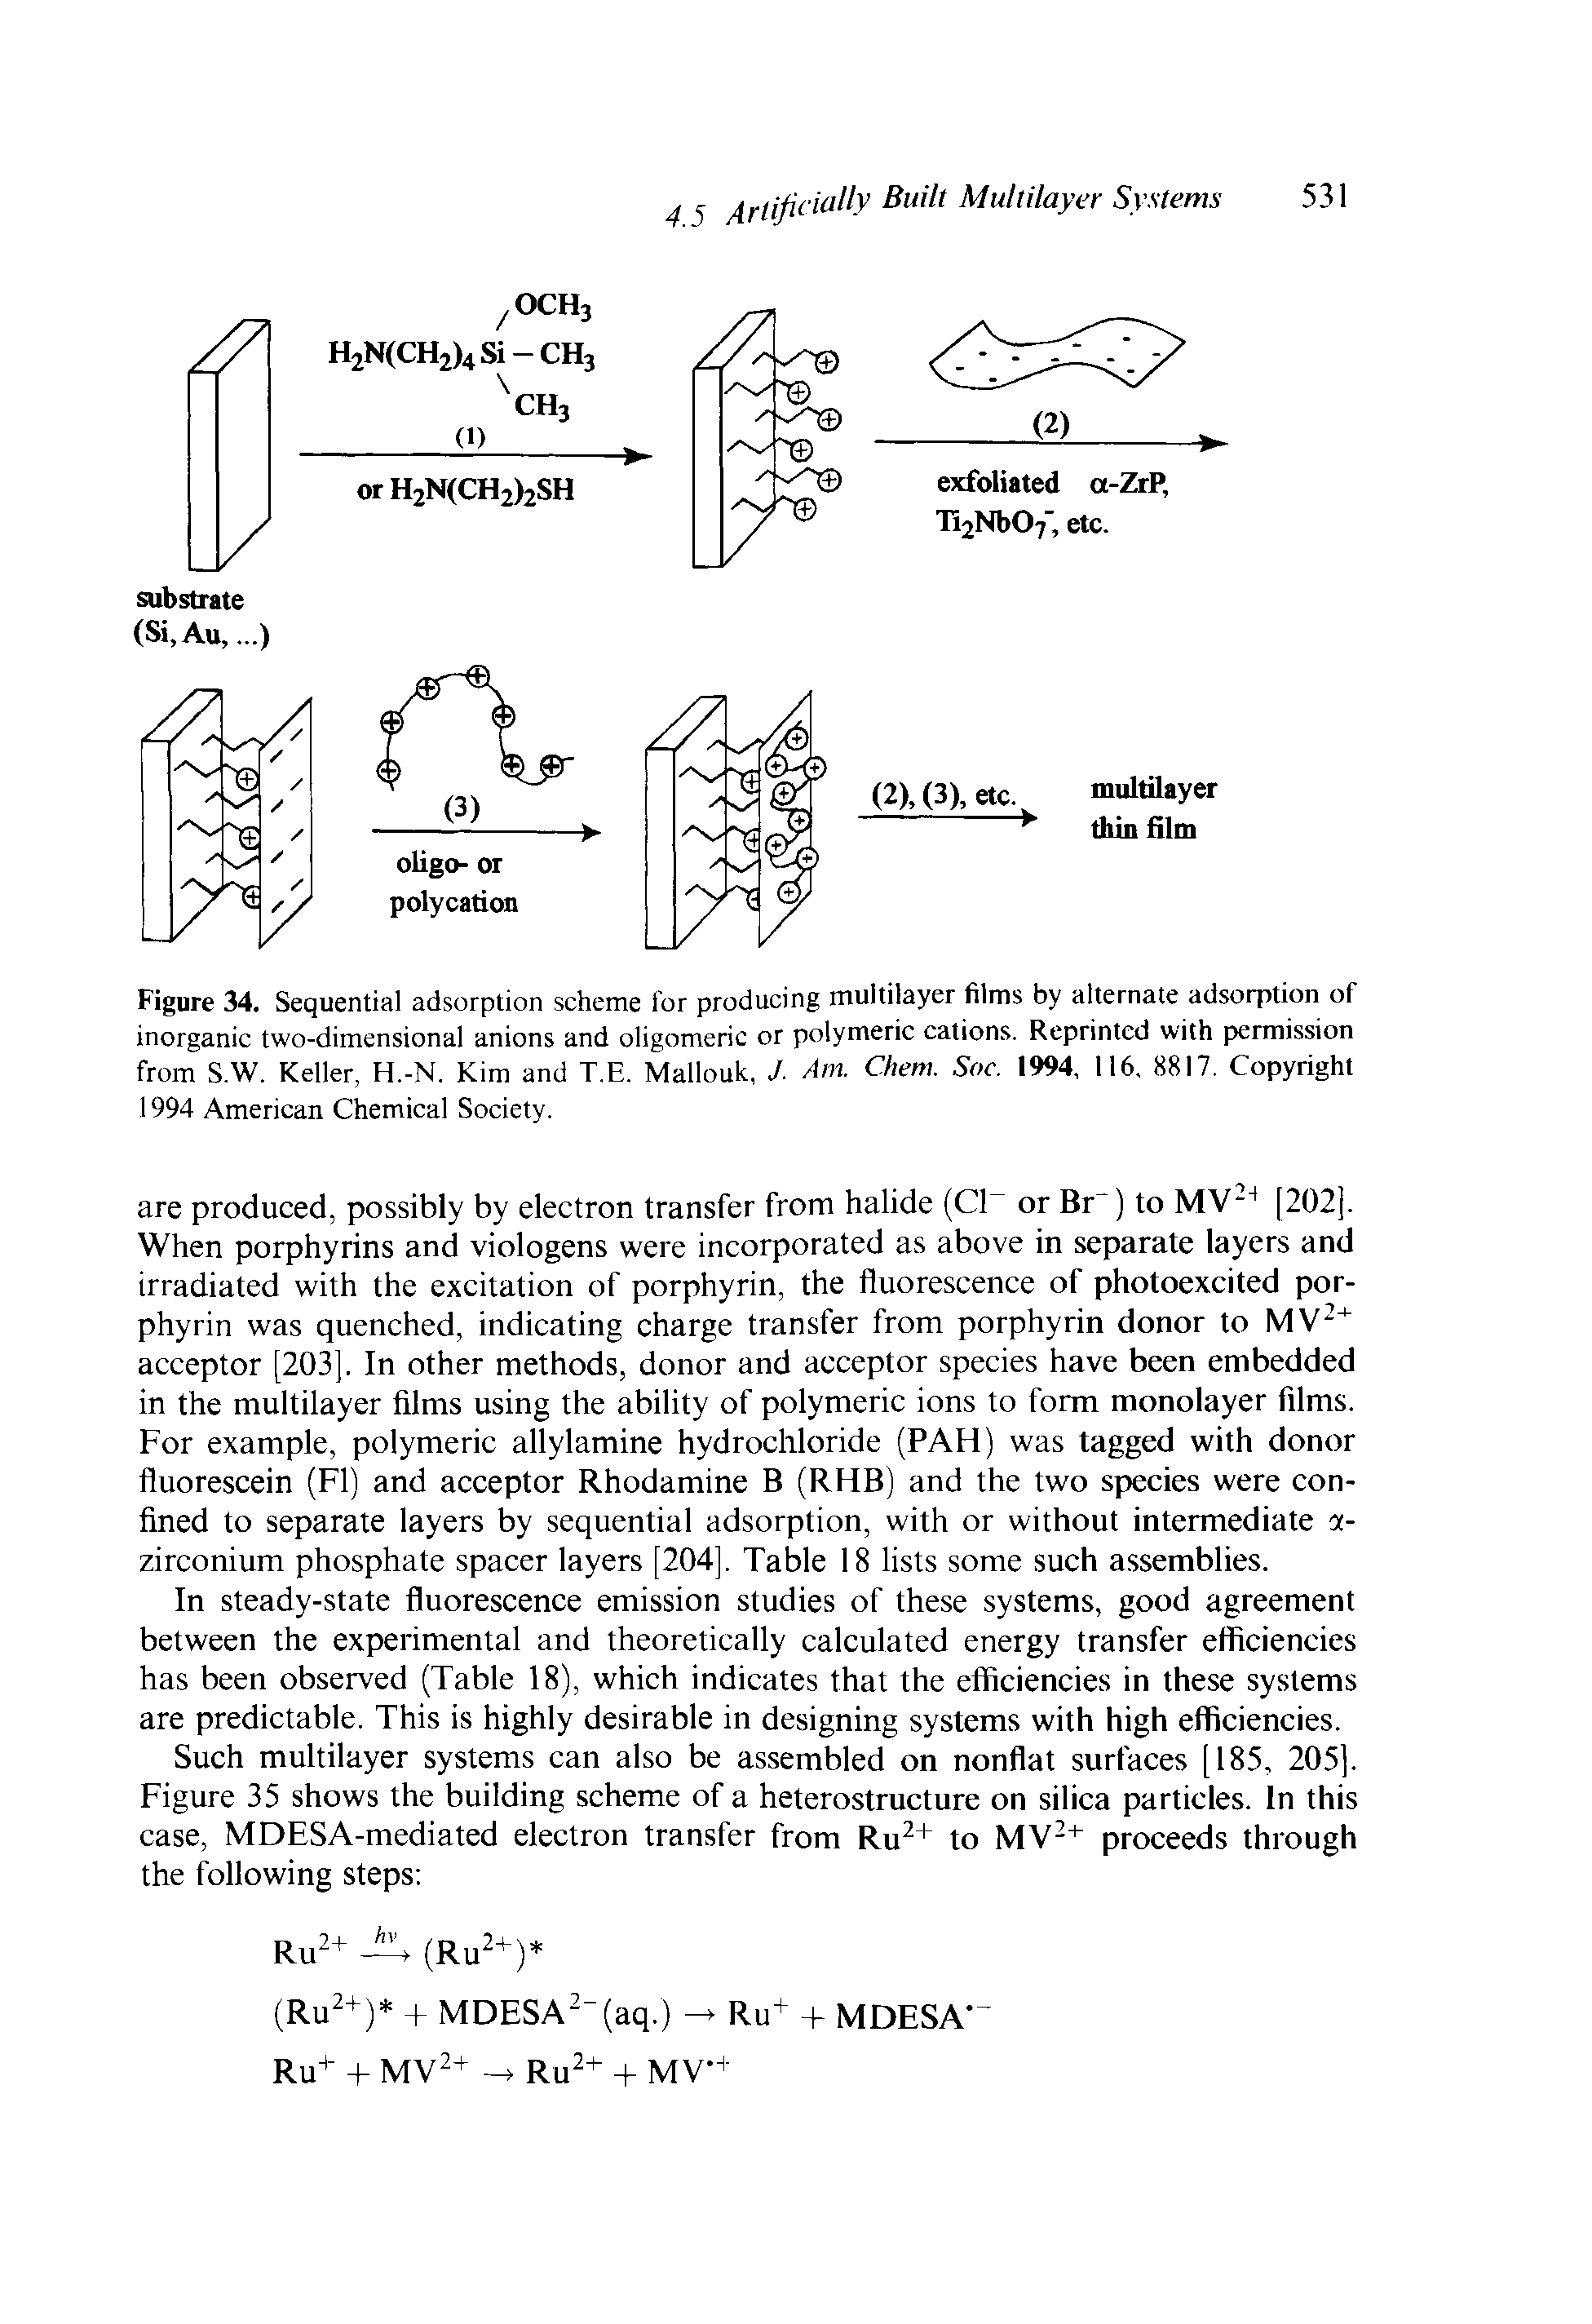 Figure 34. Sequential adsorption scheme for producing multilayer films by alternate adsorption of inorganic two-dimensional anions and oligomeric or polymeric cations. Reprinted with permission from S.W. Keller, H.-N. Kim and T.E. Mallouk, J. Am. Chem. Soc. 1994, 116, 8817. Copyright 1994 American Chemical Society.